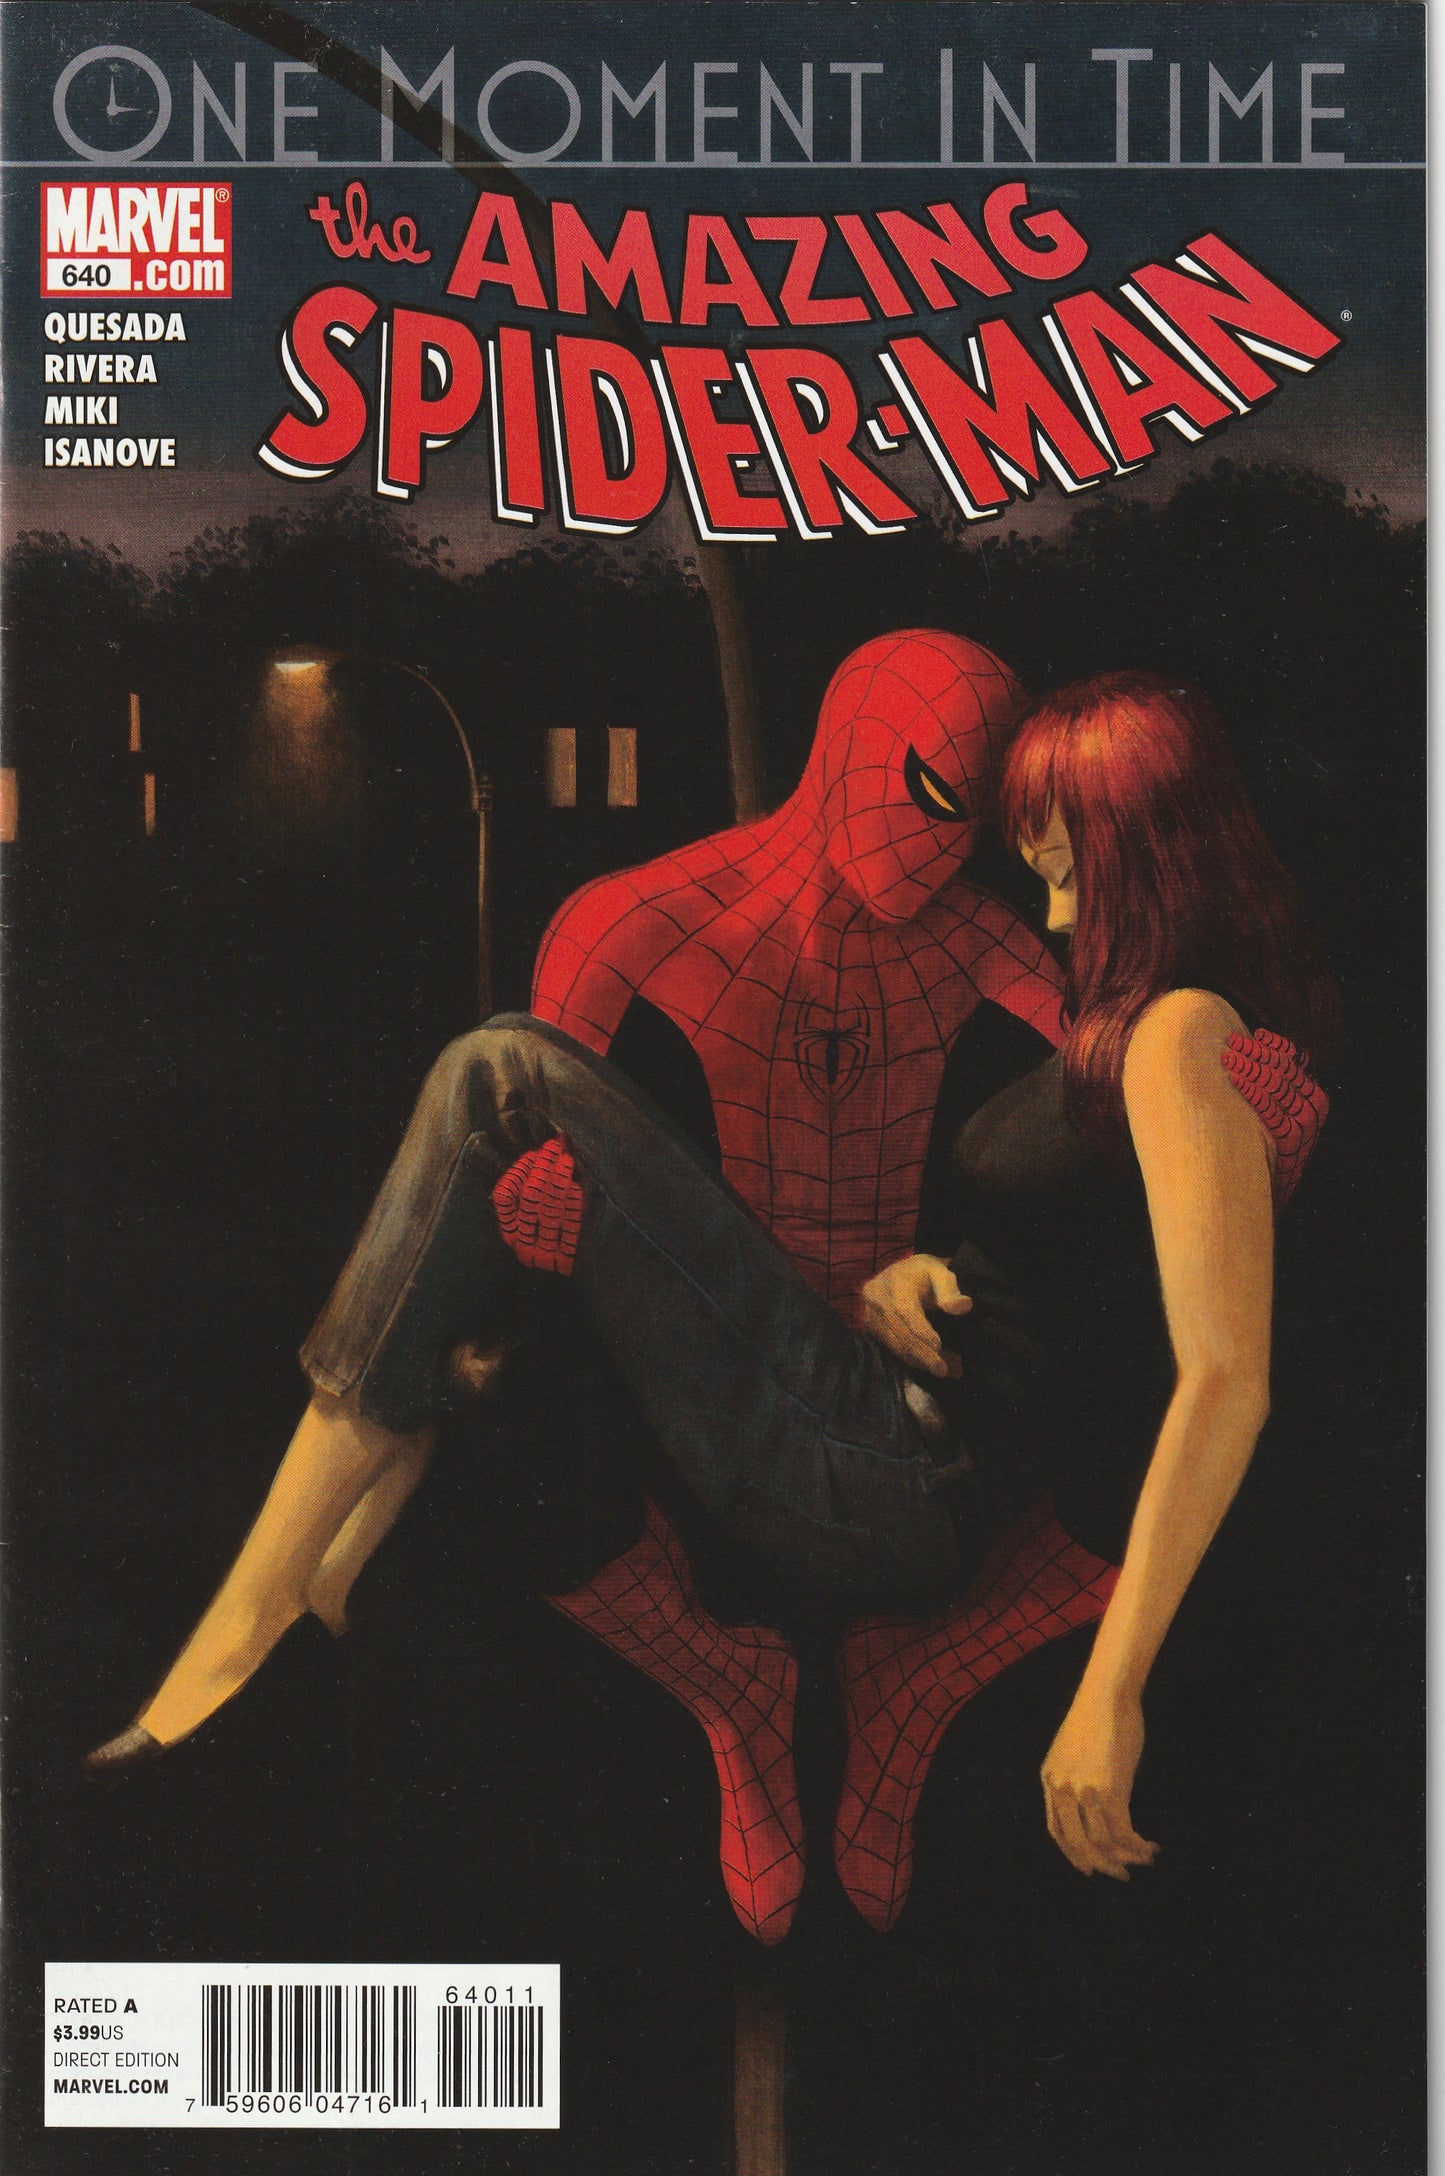 Amazing Spider-Man #640 (2010) - One Moment in Time